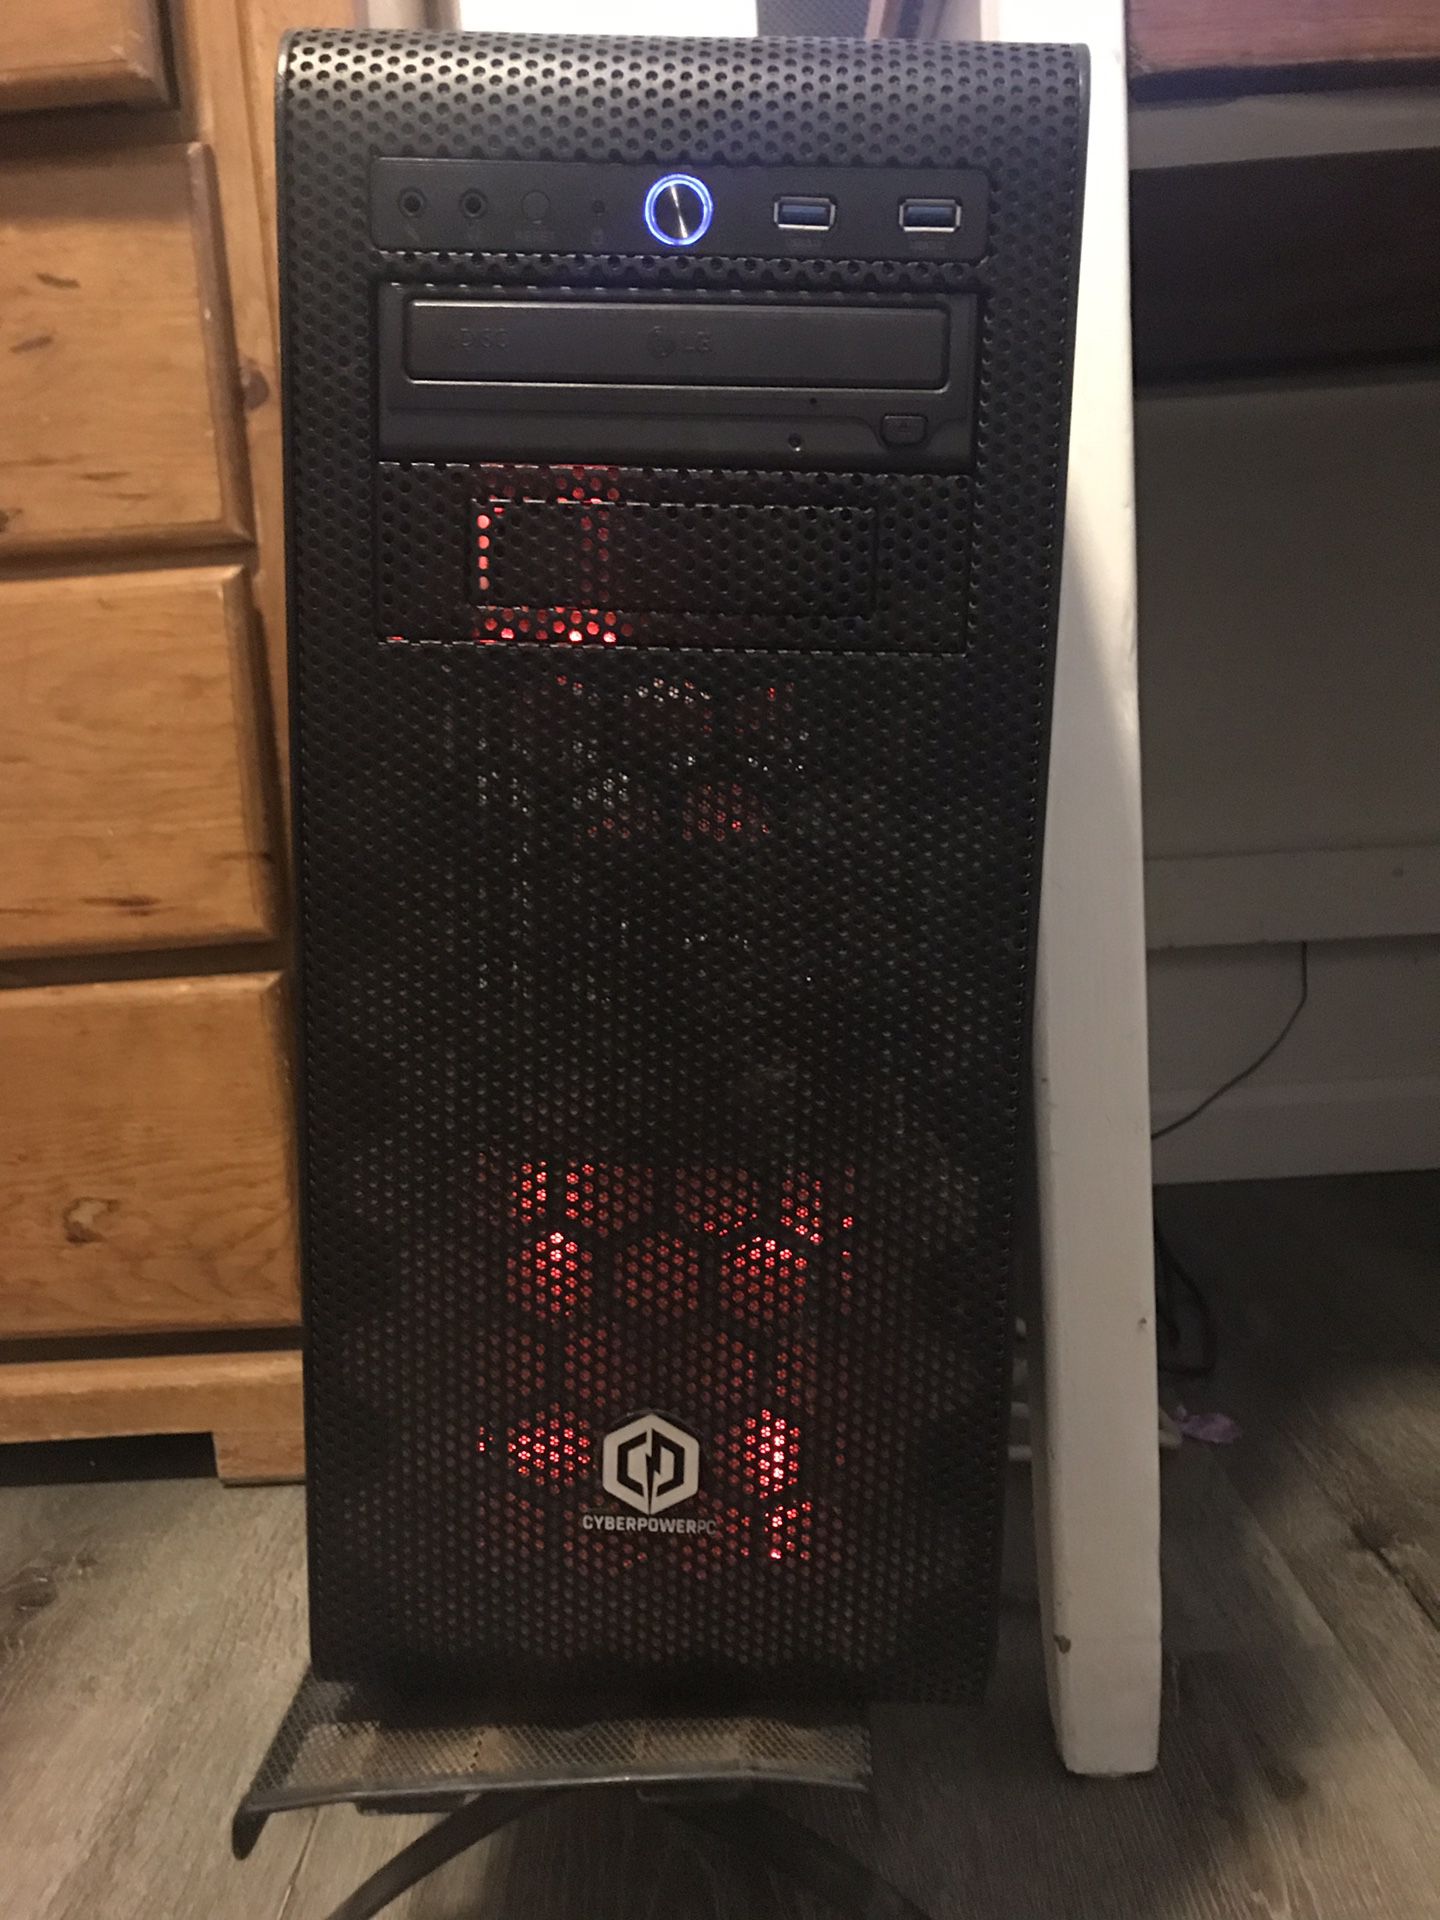 CyberPower gaming tower